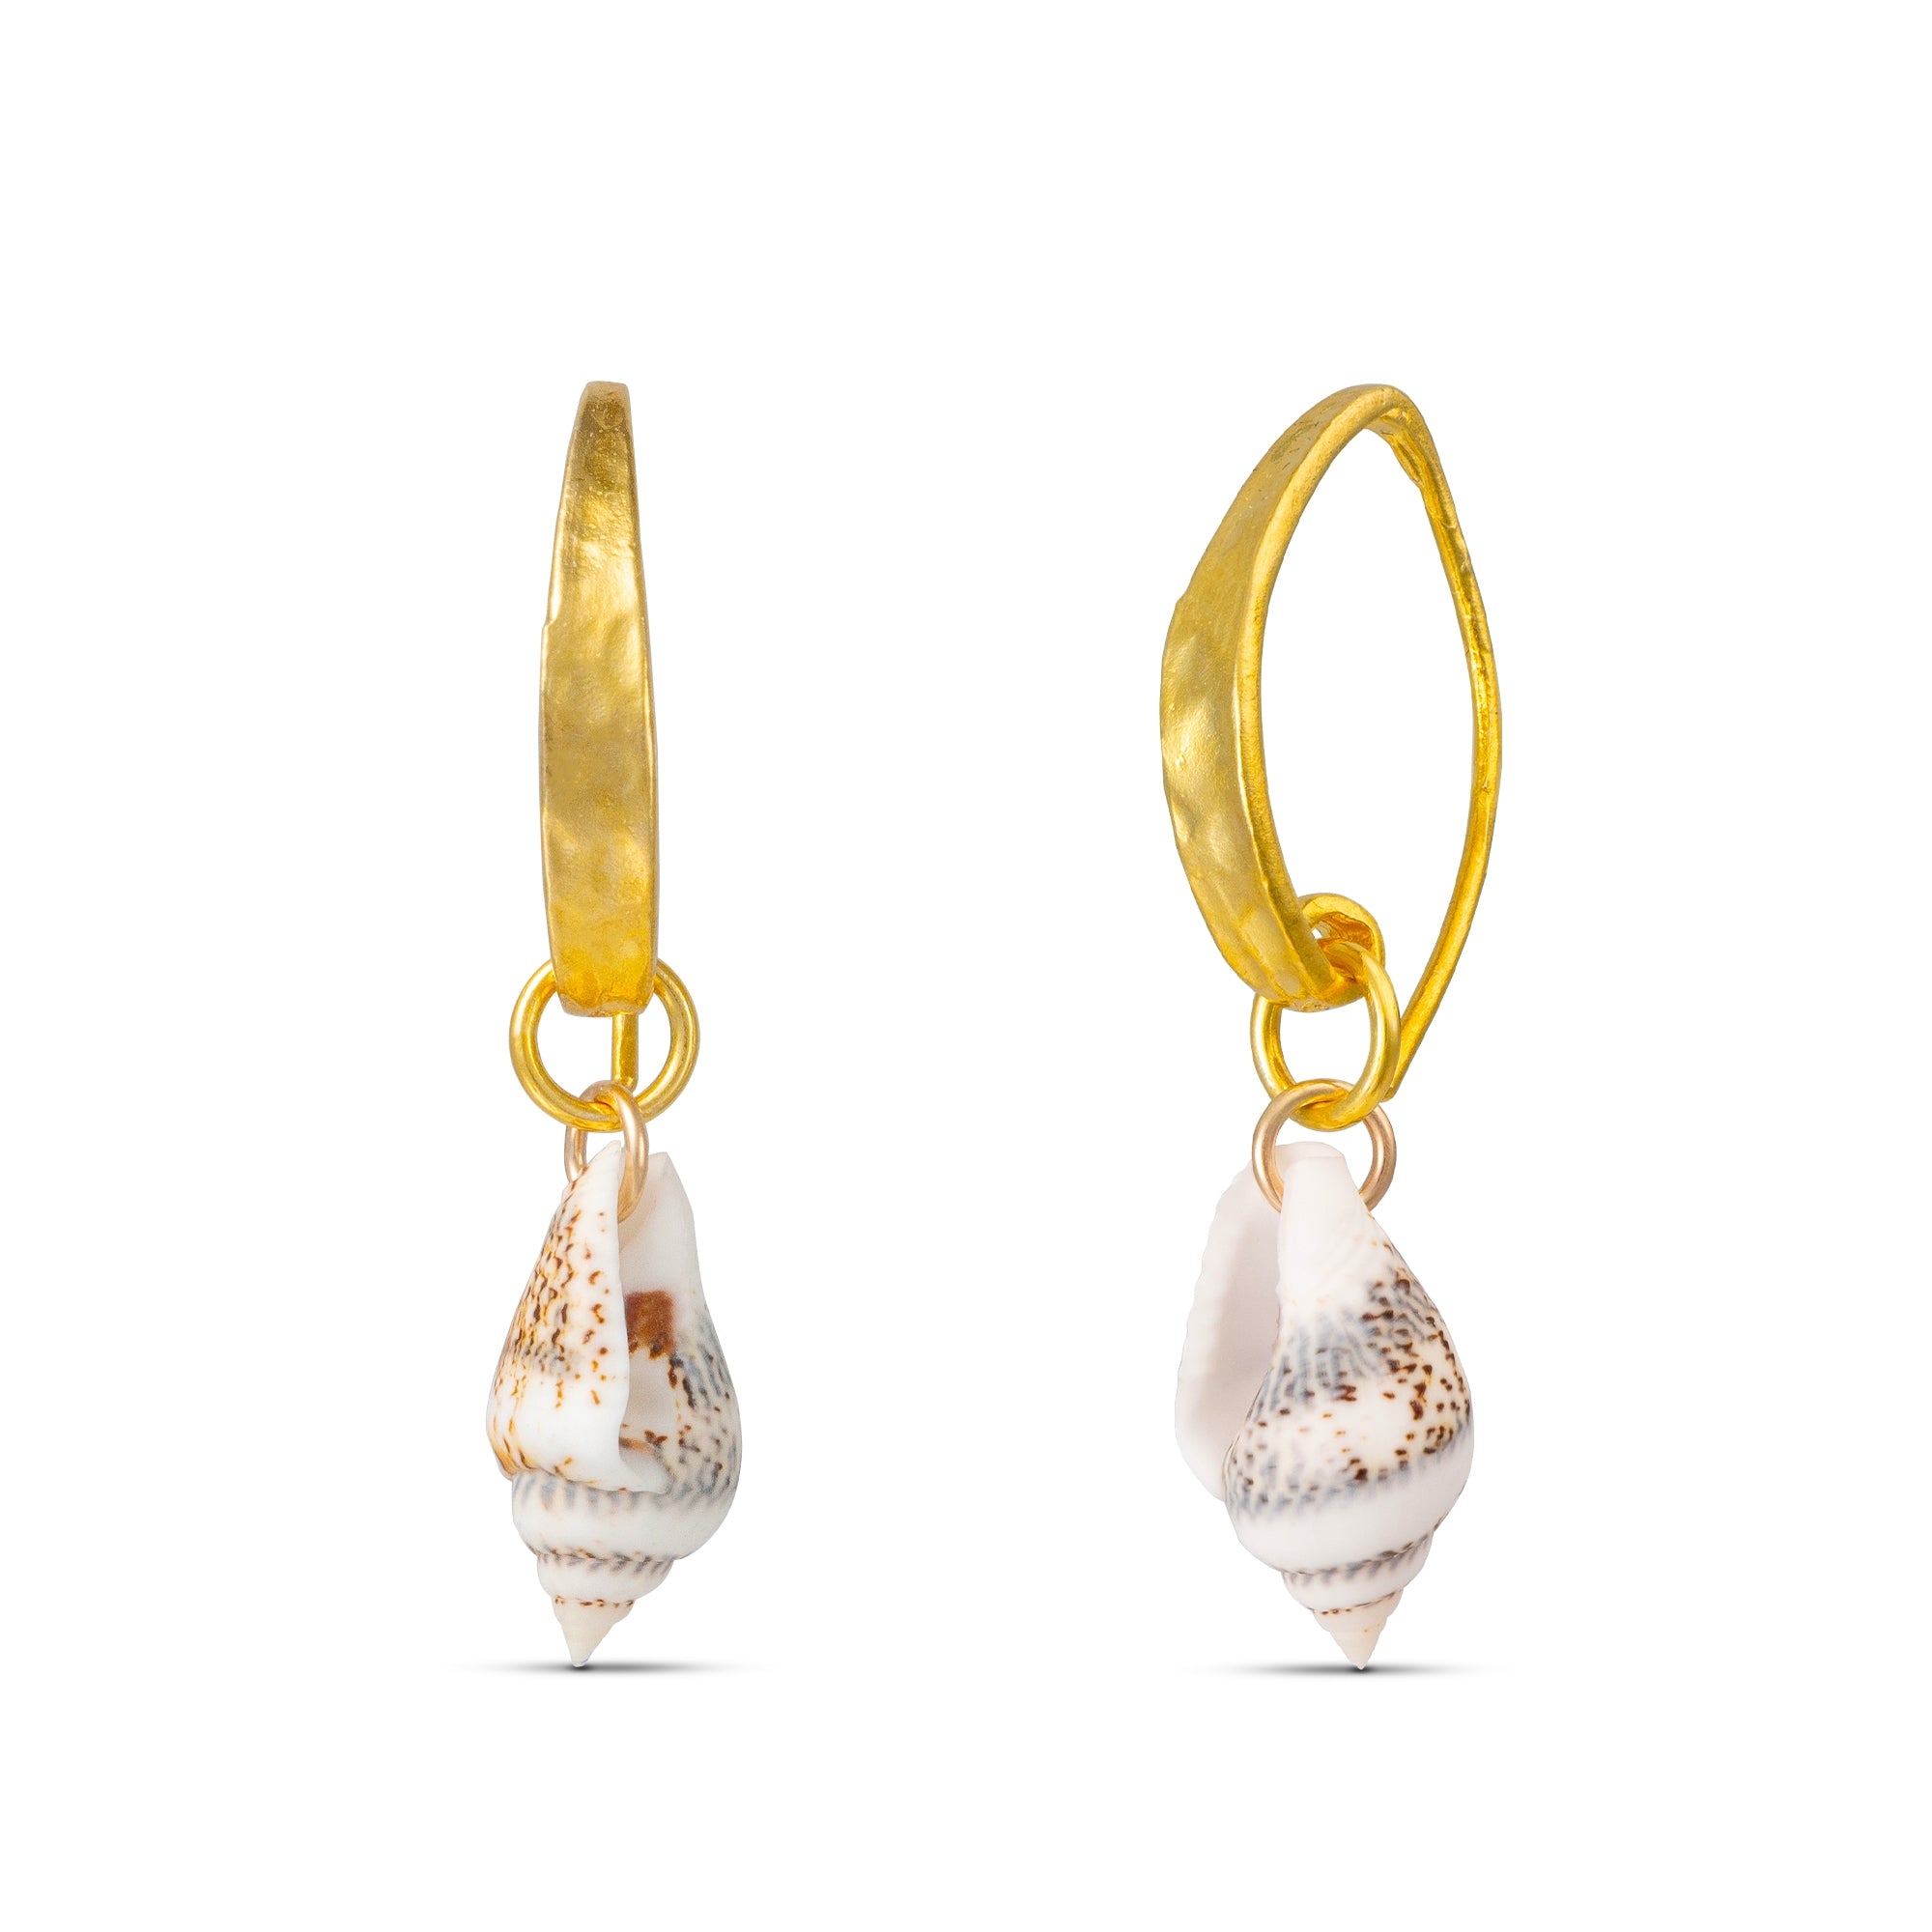 Concha - Tiger Shell Earrings Gold, Silver